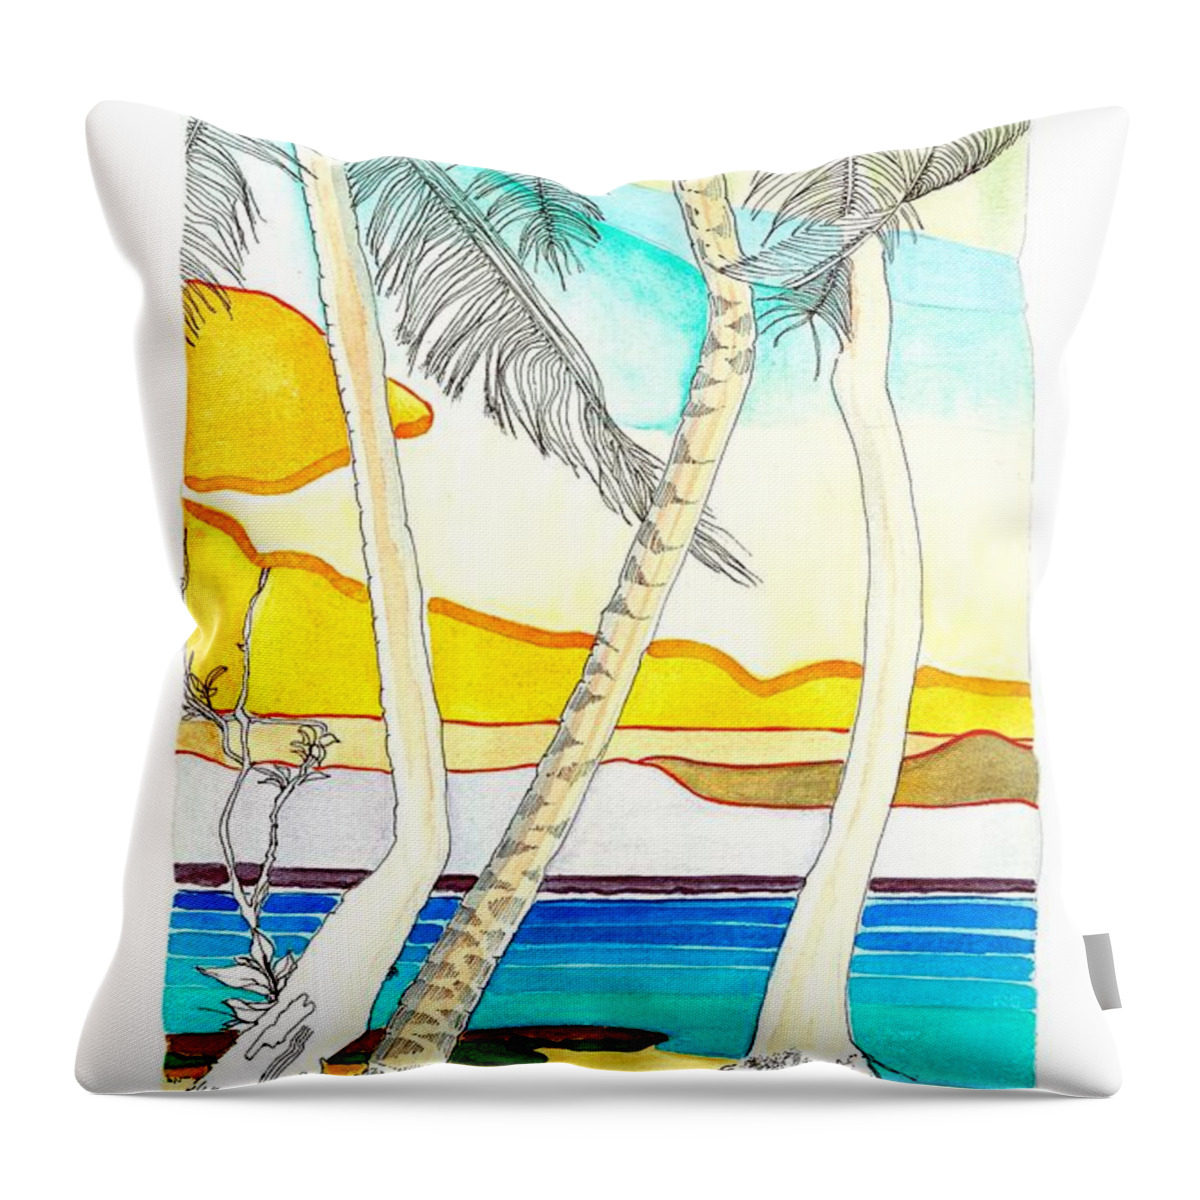 Tropical Islands - South Pacific Throw Pillow featuring the painting Coral Coast - Fiji by Joan Cordell